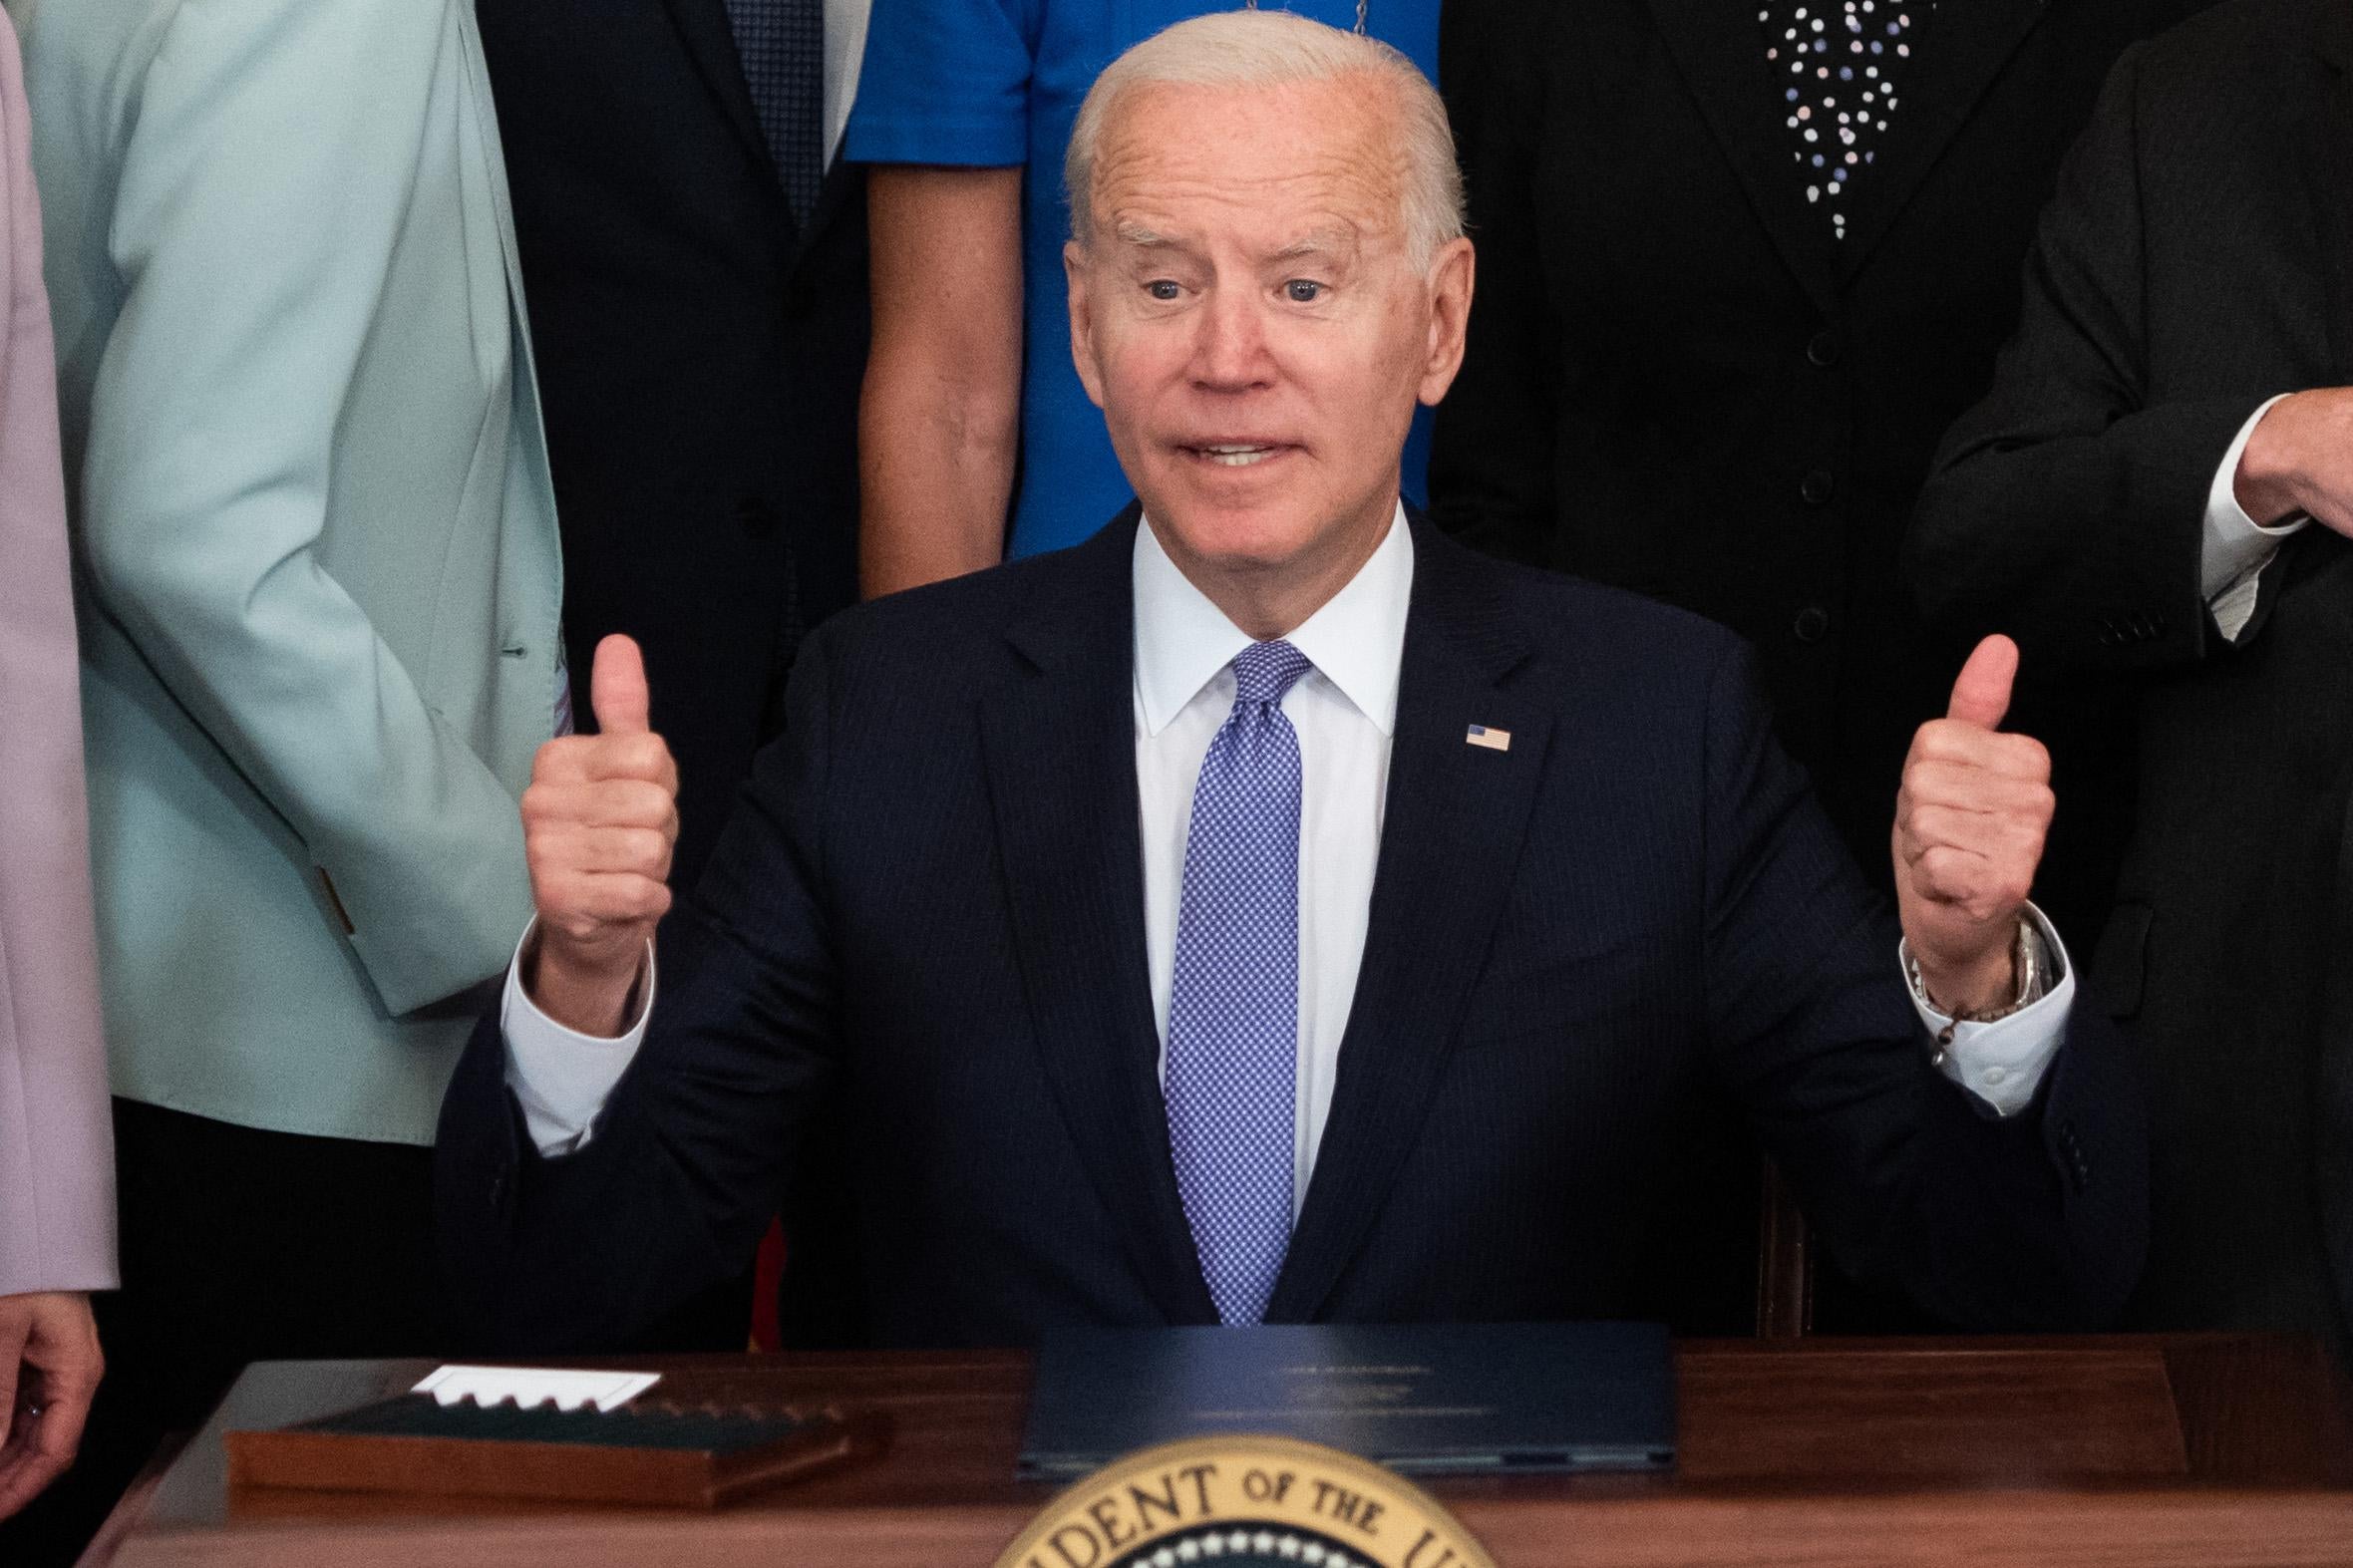 Joe Biden sits at a desk and flashes two thumbs up as people stand behind him.